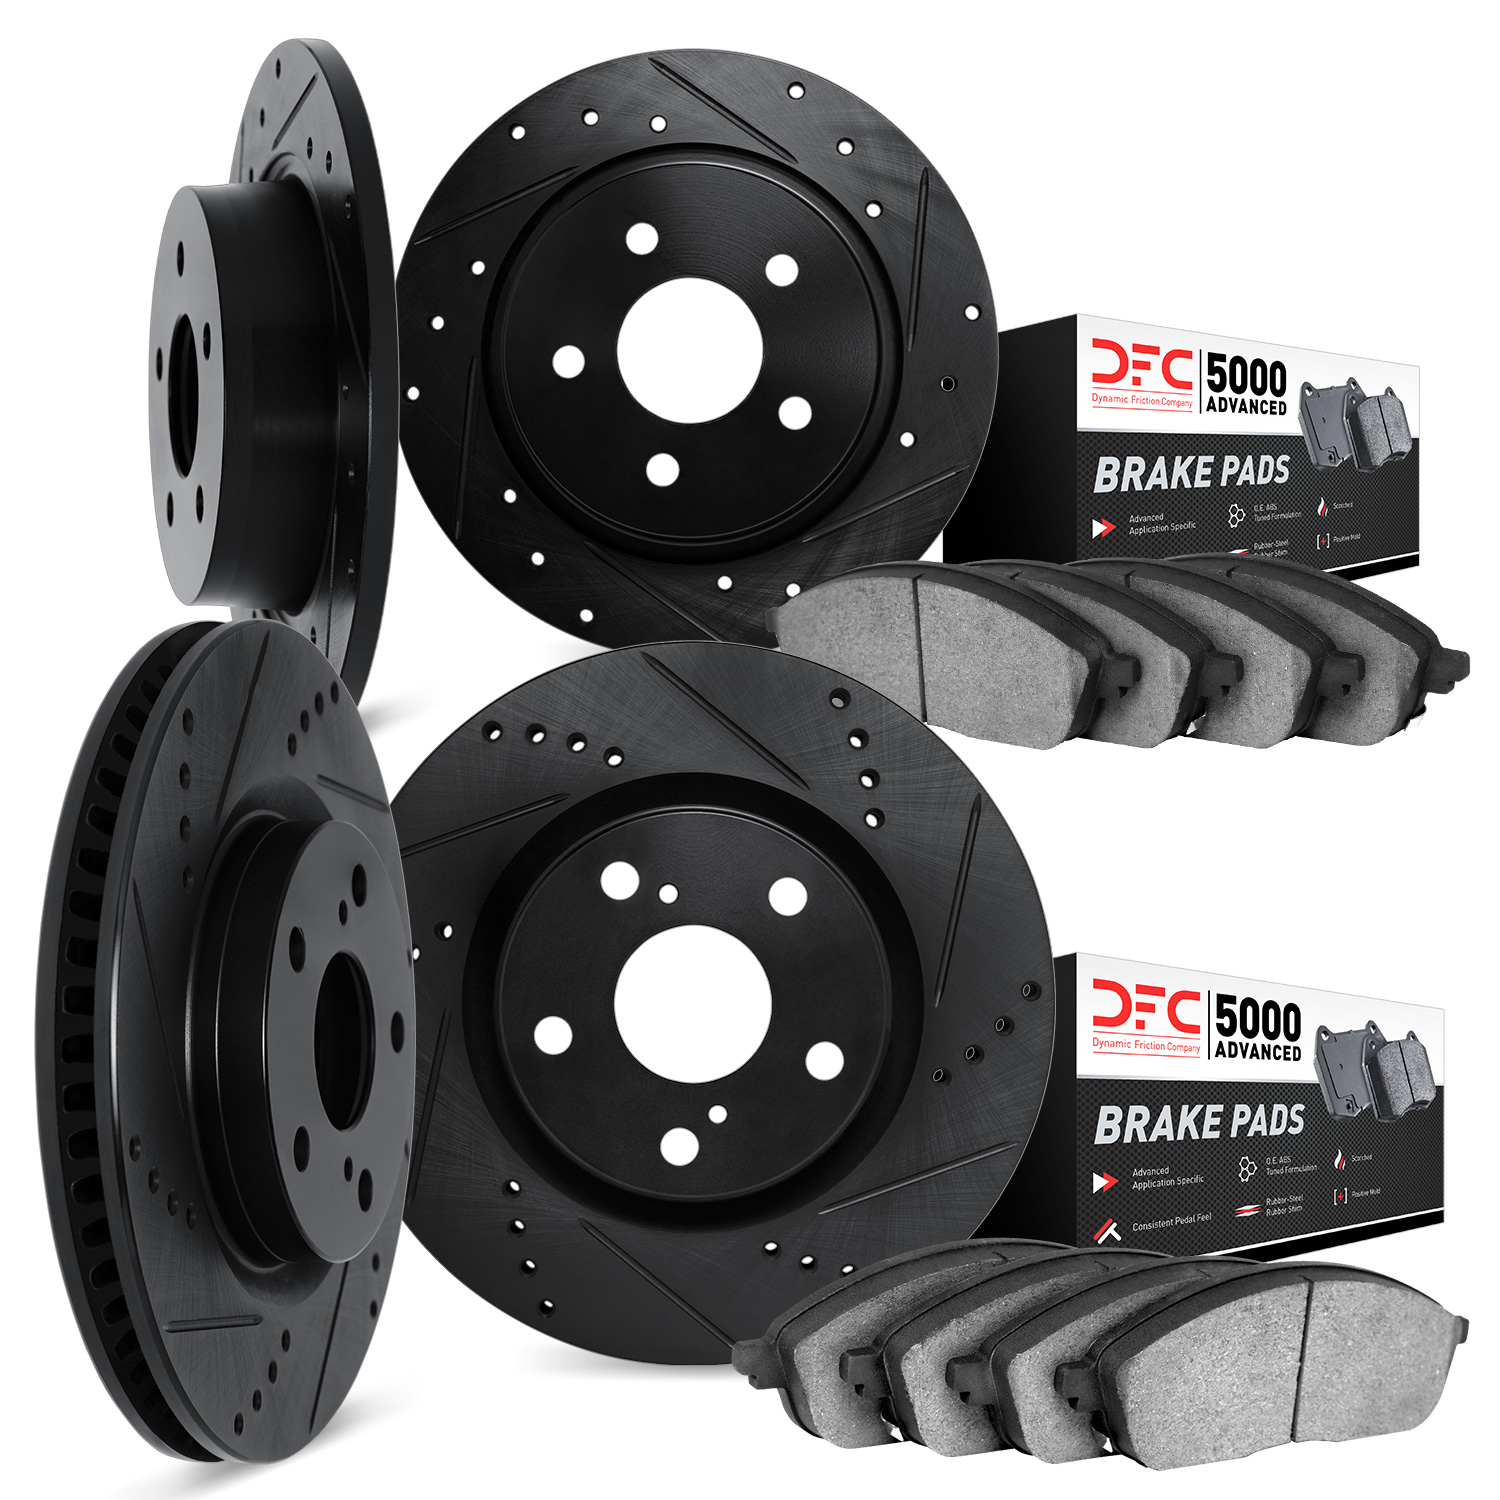 8504-58004 Drilled/Slotted Brake Rotors w/5000 Advanced Brake Pads Kit [Black], 2009-2014 Acura/Honda, Position: Front and Rear